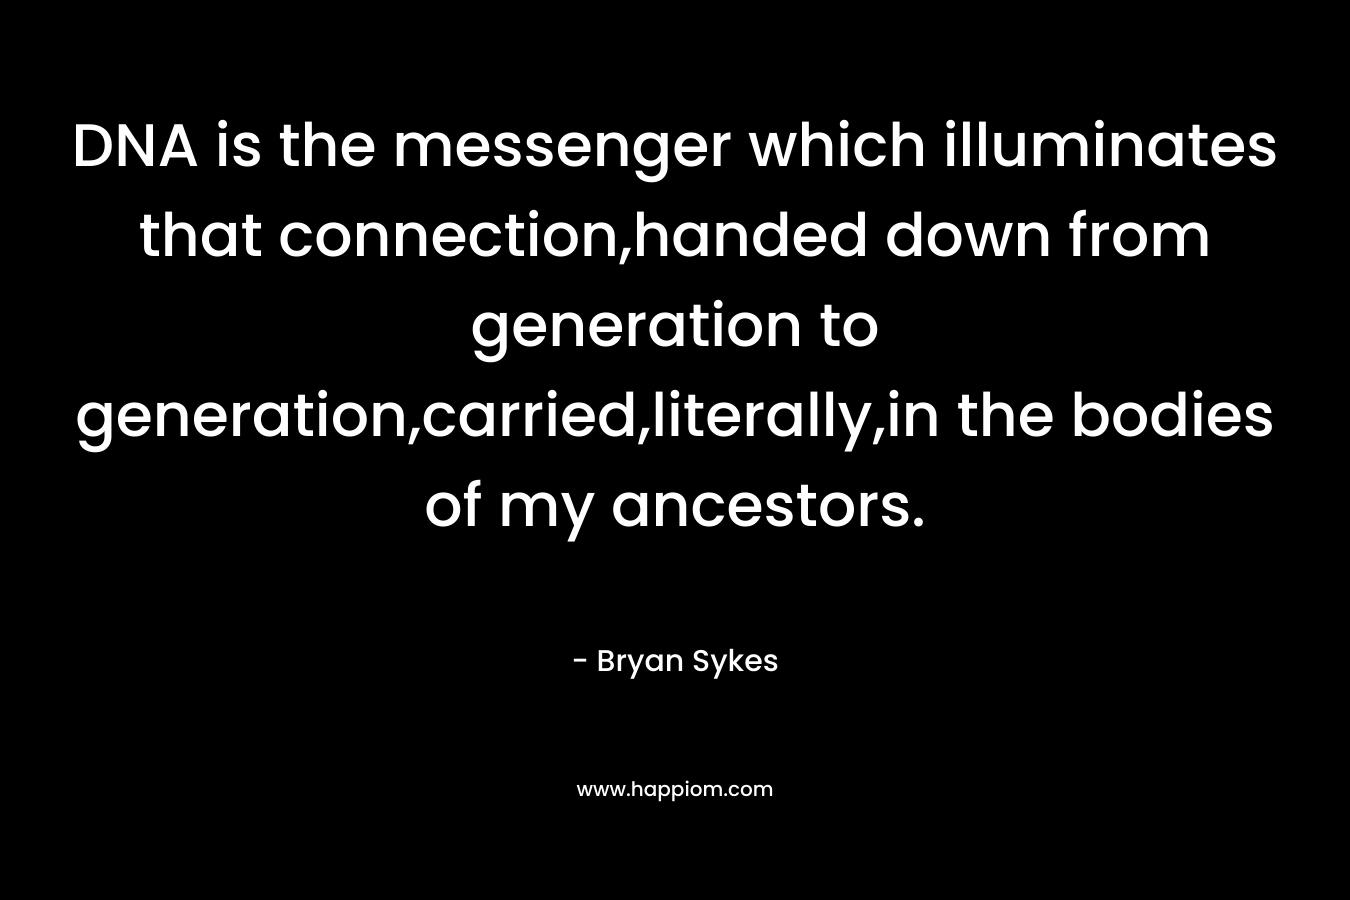 DNA is the messenger which illuminates that connection,handed down from generation to generation,carried,literally,in the bodies of my ancestors.